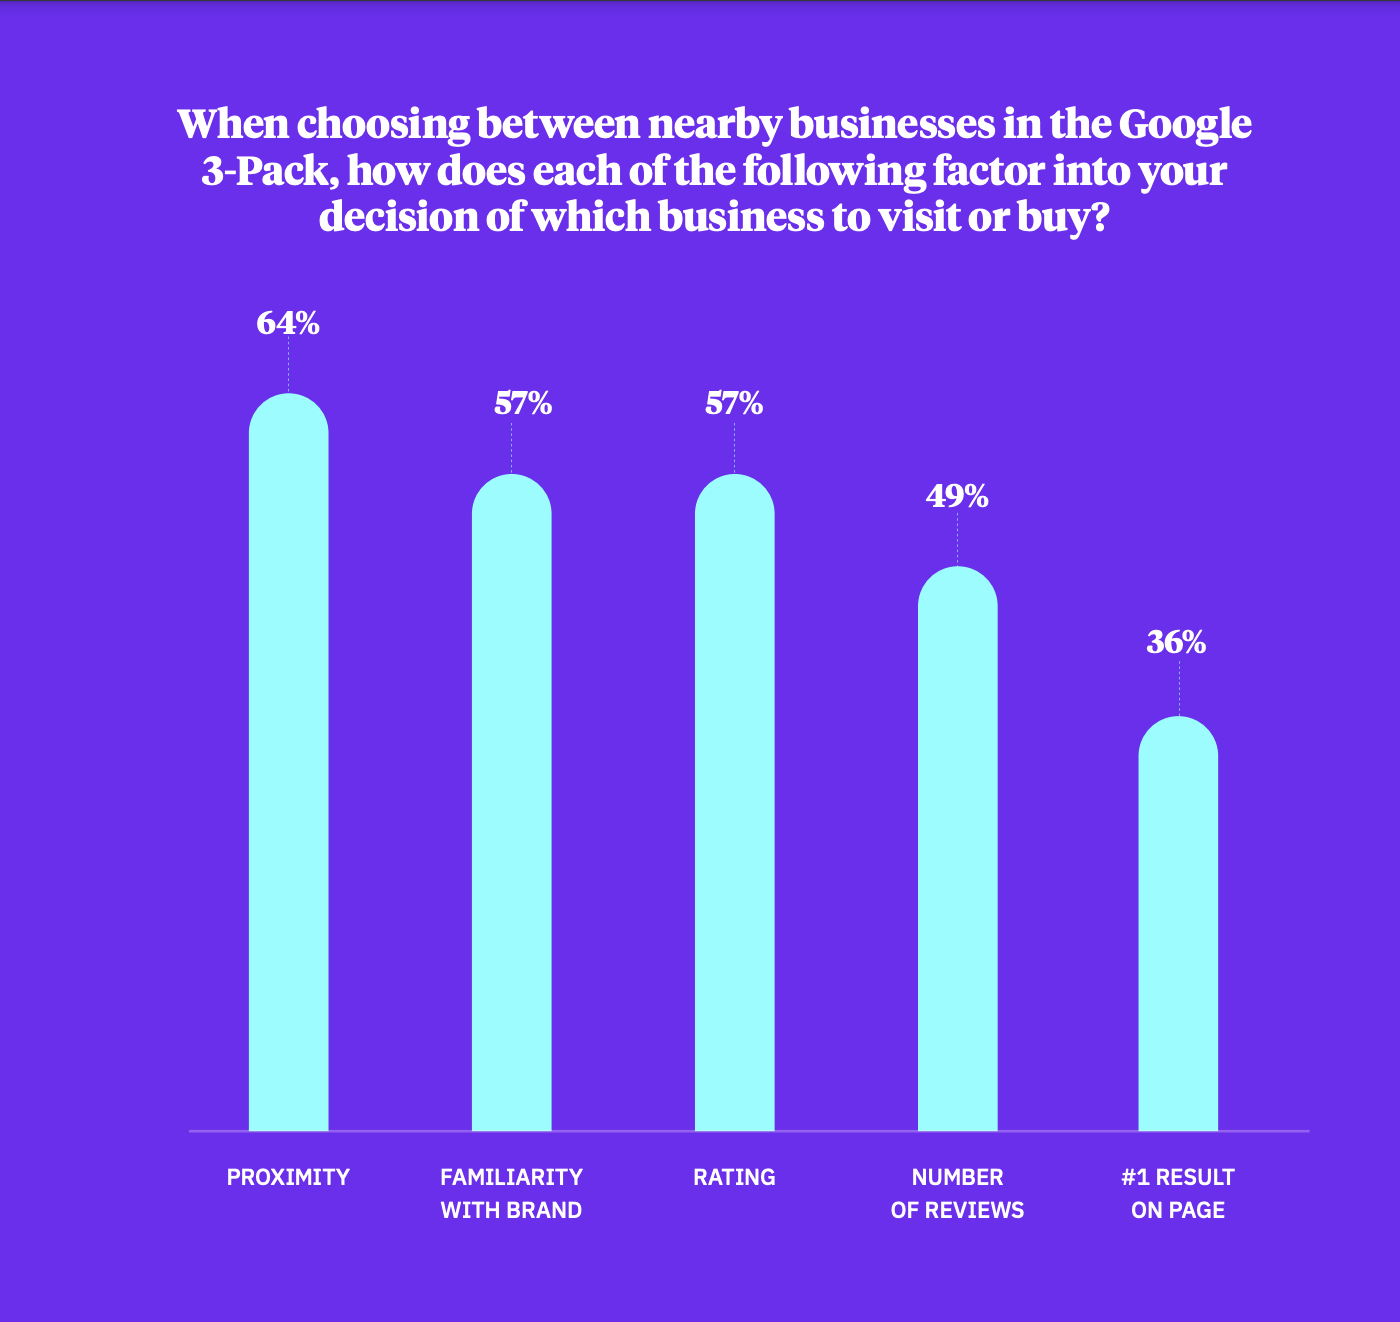 Factors that matter in consumer consideration of a business in the Google 3-Pack